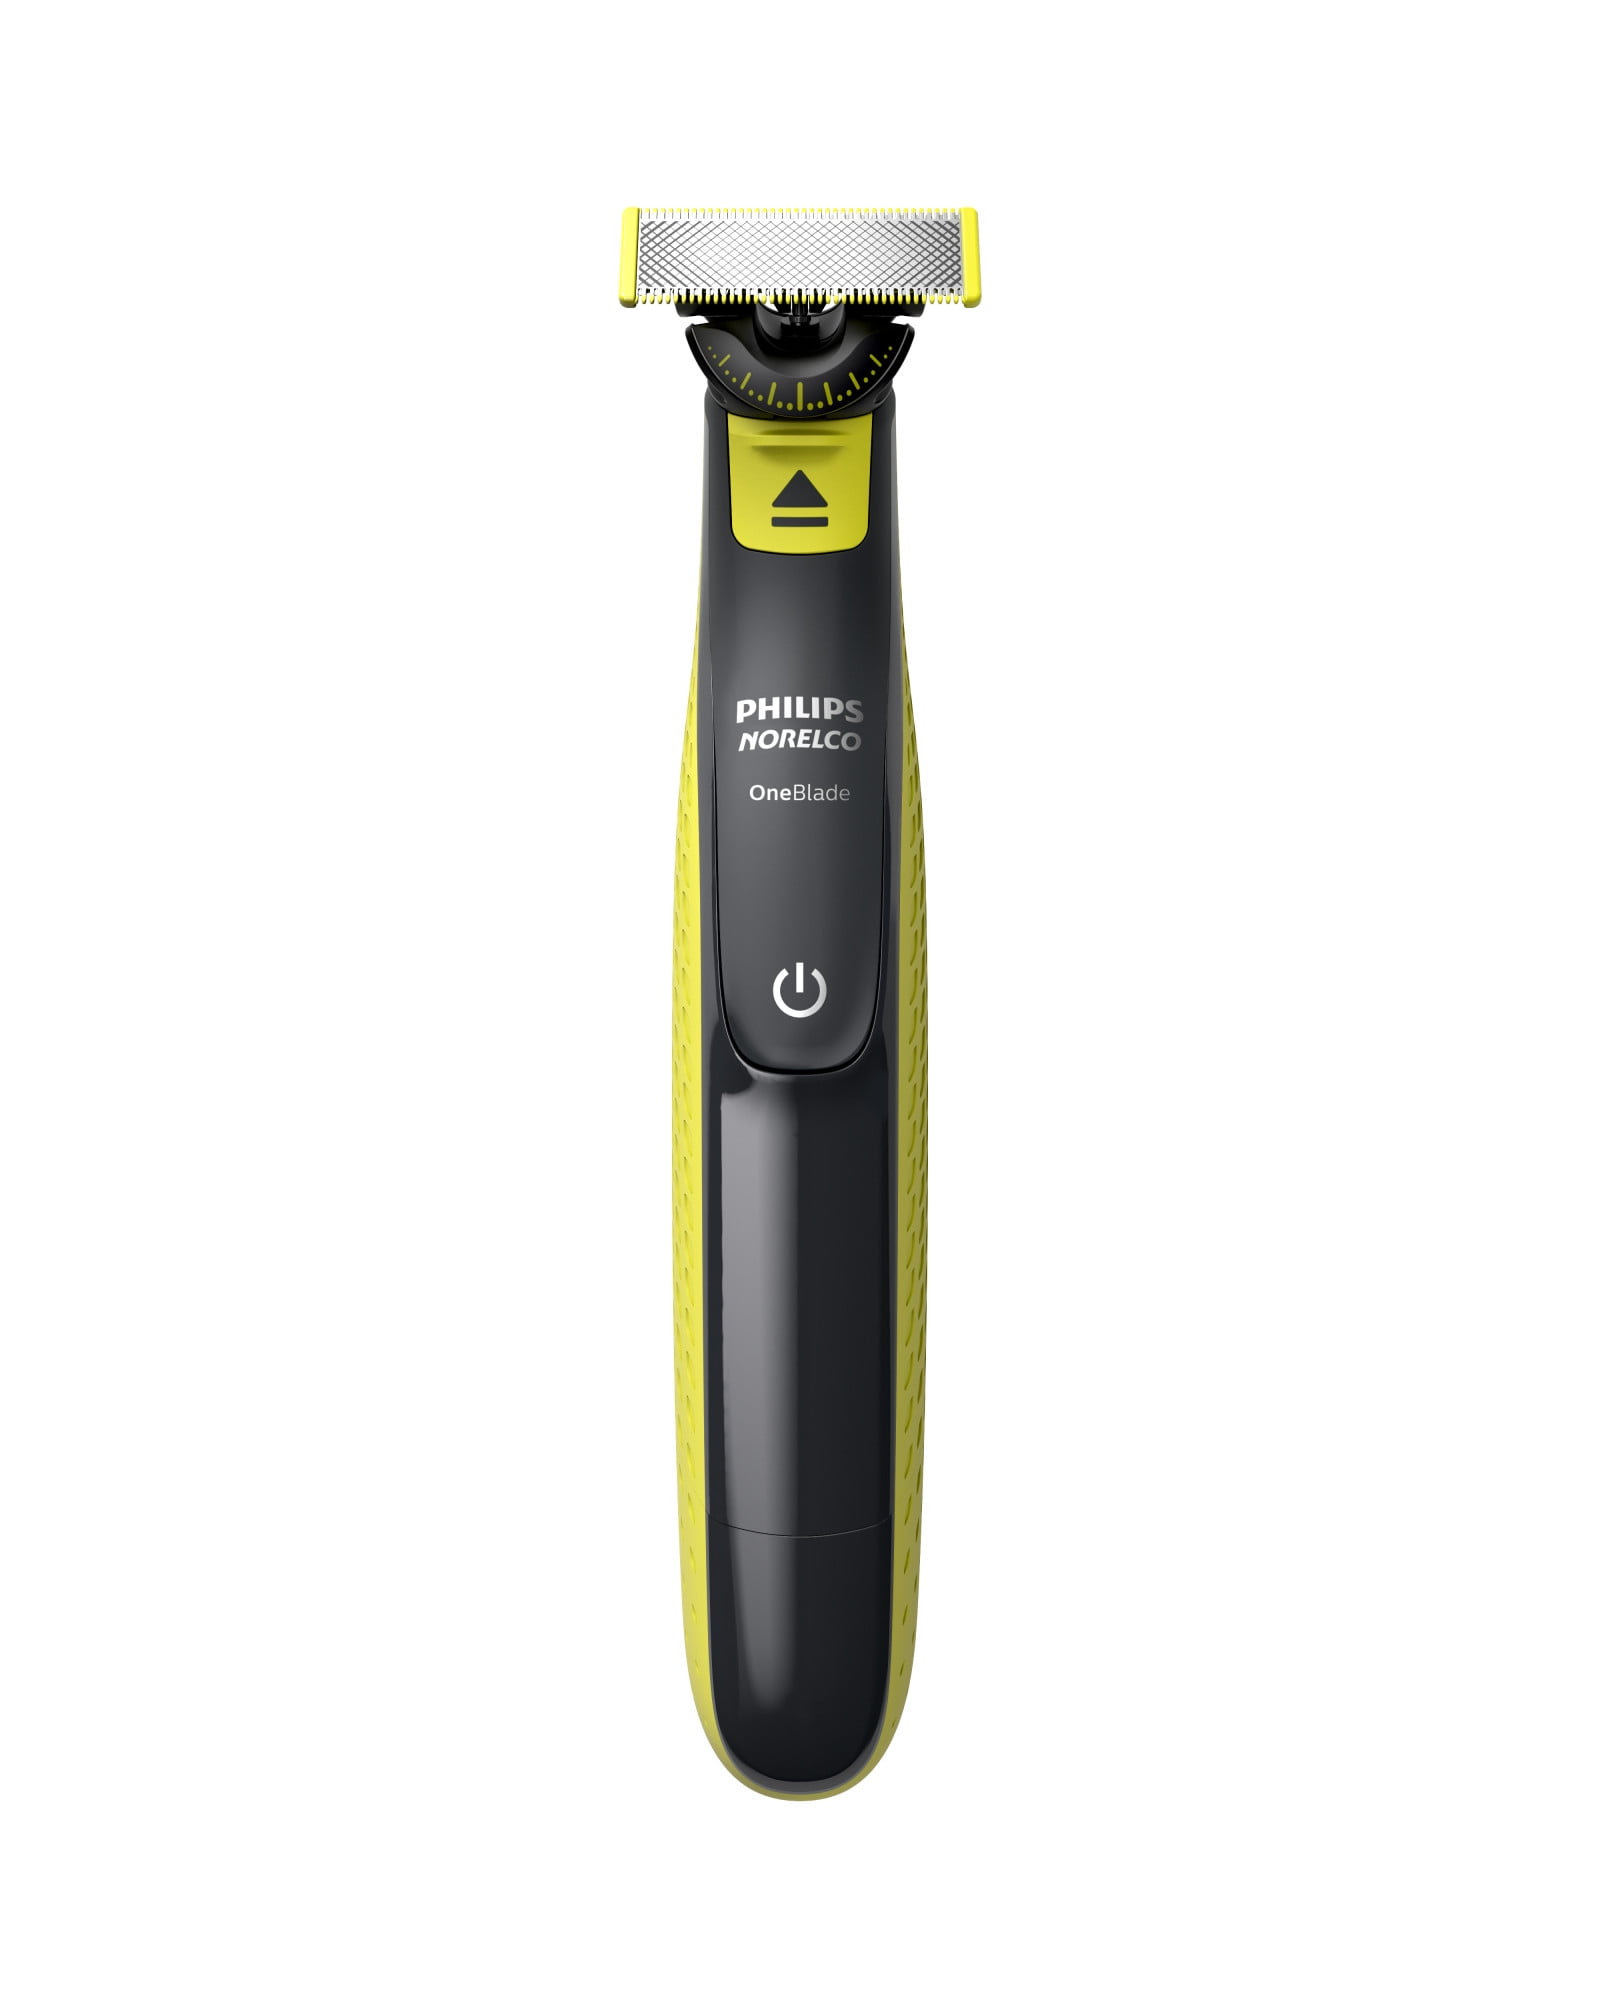 Philips Norelco Oneblade Trim- Edge-Shave 360 Blade-5 Length Settings Face